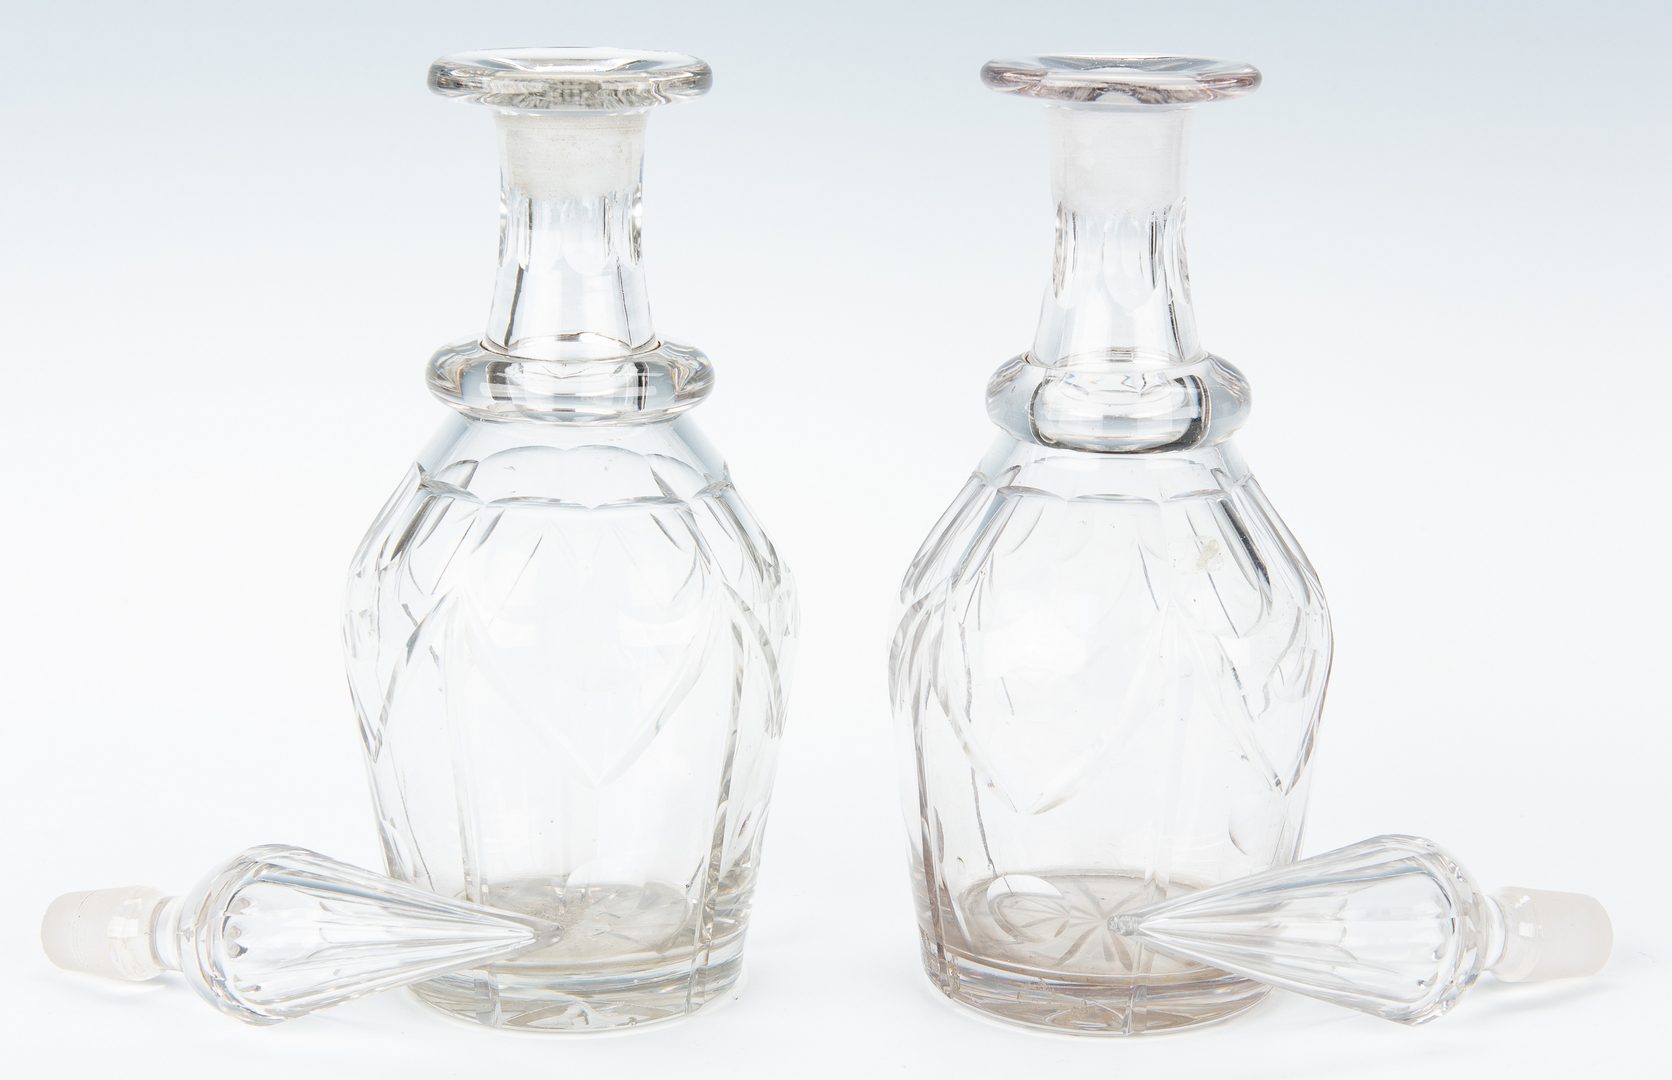 Lot 243: Anglo-Irish Cut-Crystal: 3 Decanters & 1 Fruit Bowl